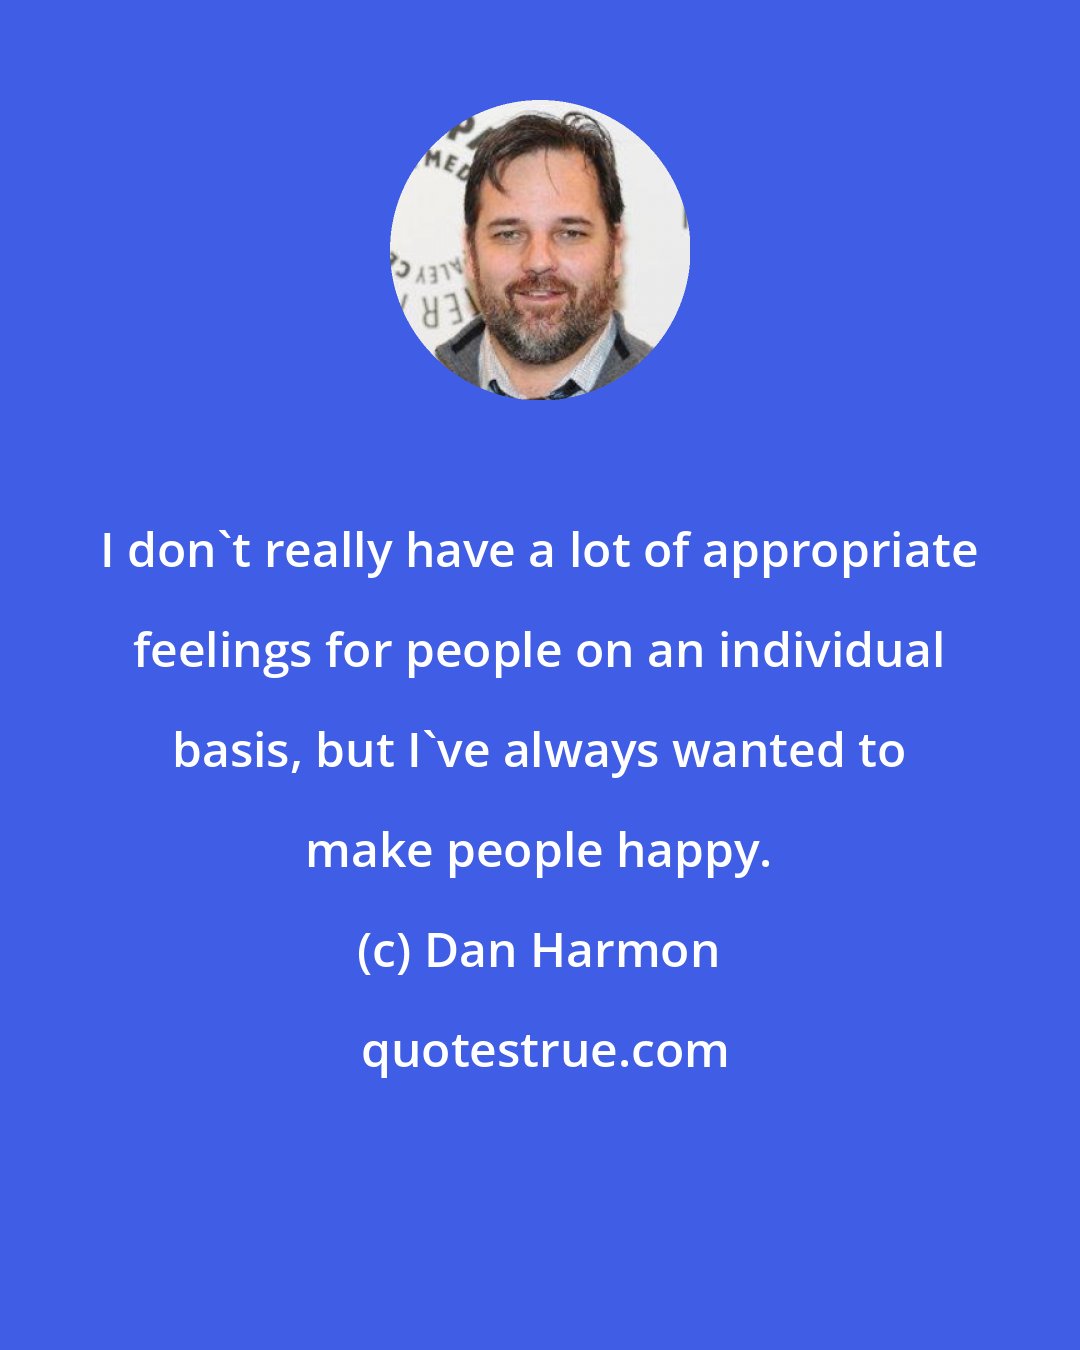 Dan Harmon: I don't really have a lot of appropriate feelings for people on an individual basis, but I've always wanted to make people happy.